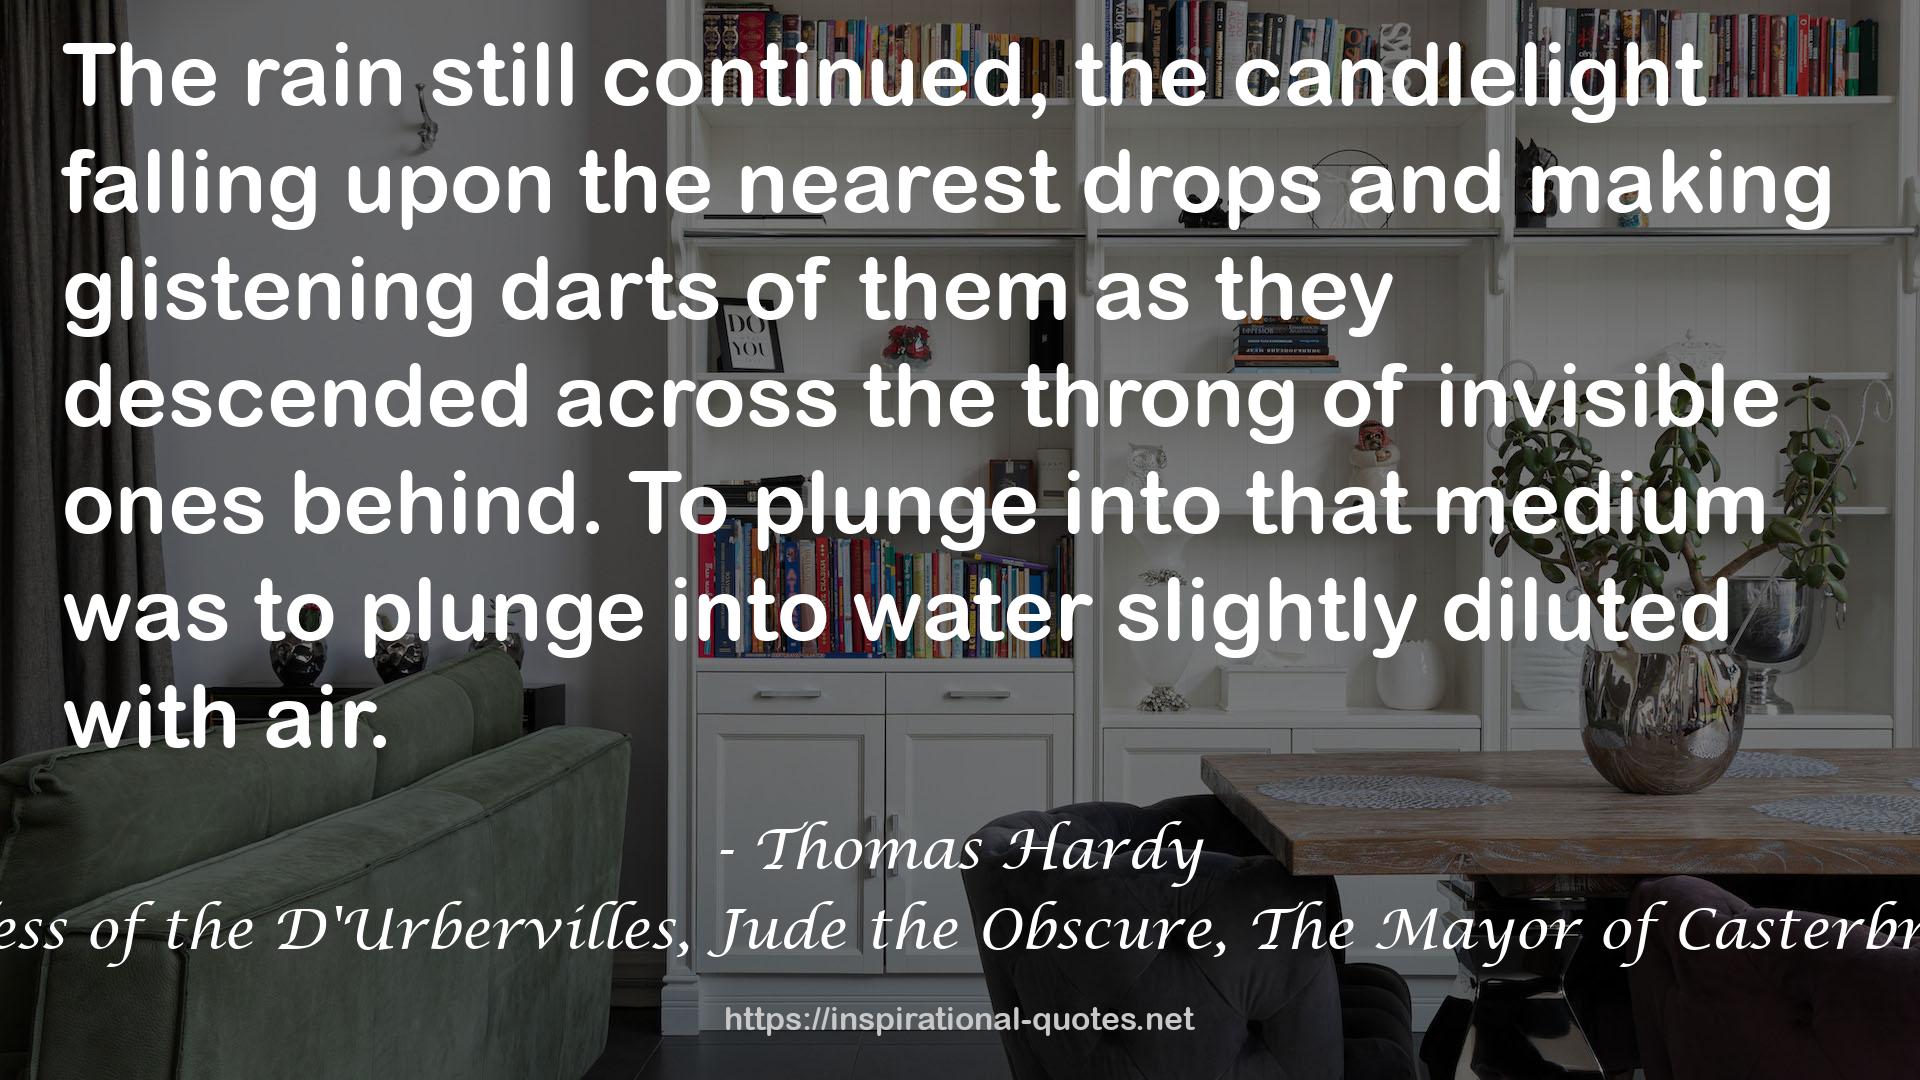 Thomas Hardy: The Complete Novels [Tess of the D'Urbervilles, Jude the Obscure, The Mayor of Casterbridge, Two on a Tower, etc] (Book House) QUOTES